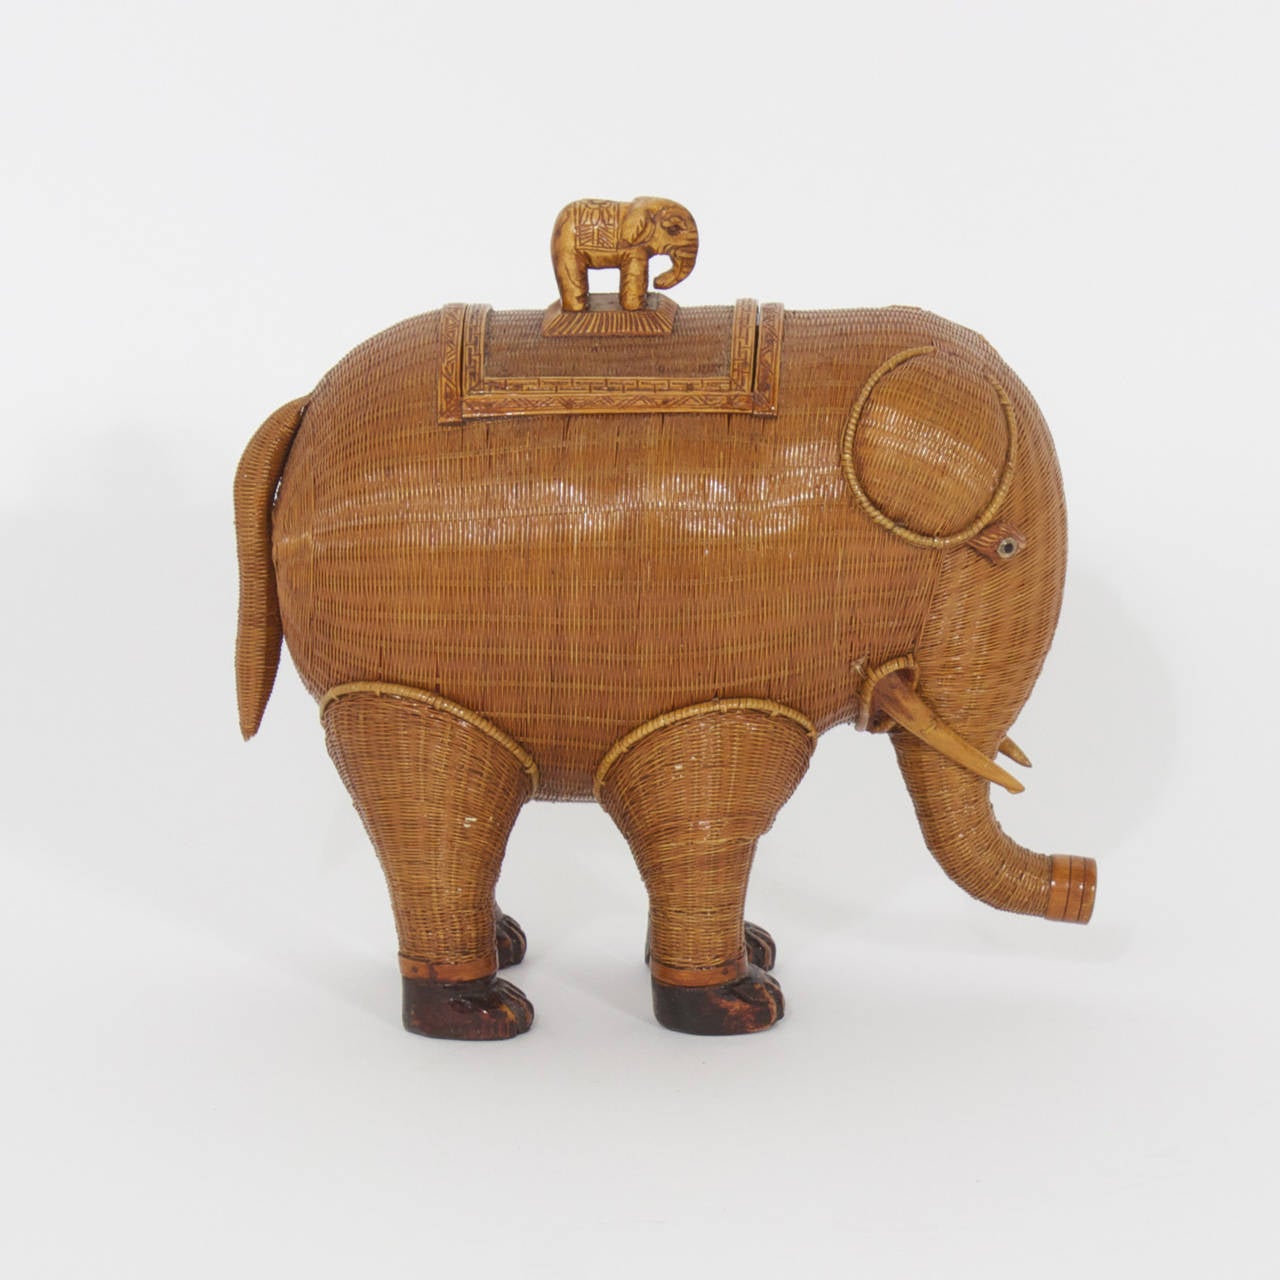 Amusing wicker elephant box constructed with an incredible tight weave, carved wood trim, glass eyes and removable saddle for secret storage. This will put a smile on your face. Works well in all decors, including tropical, campaign, British